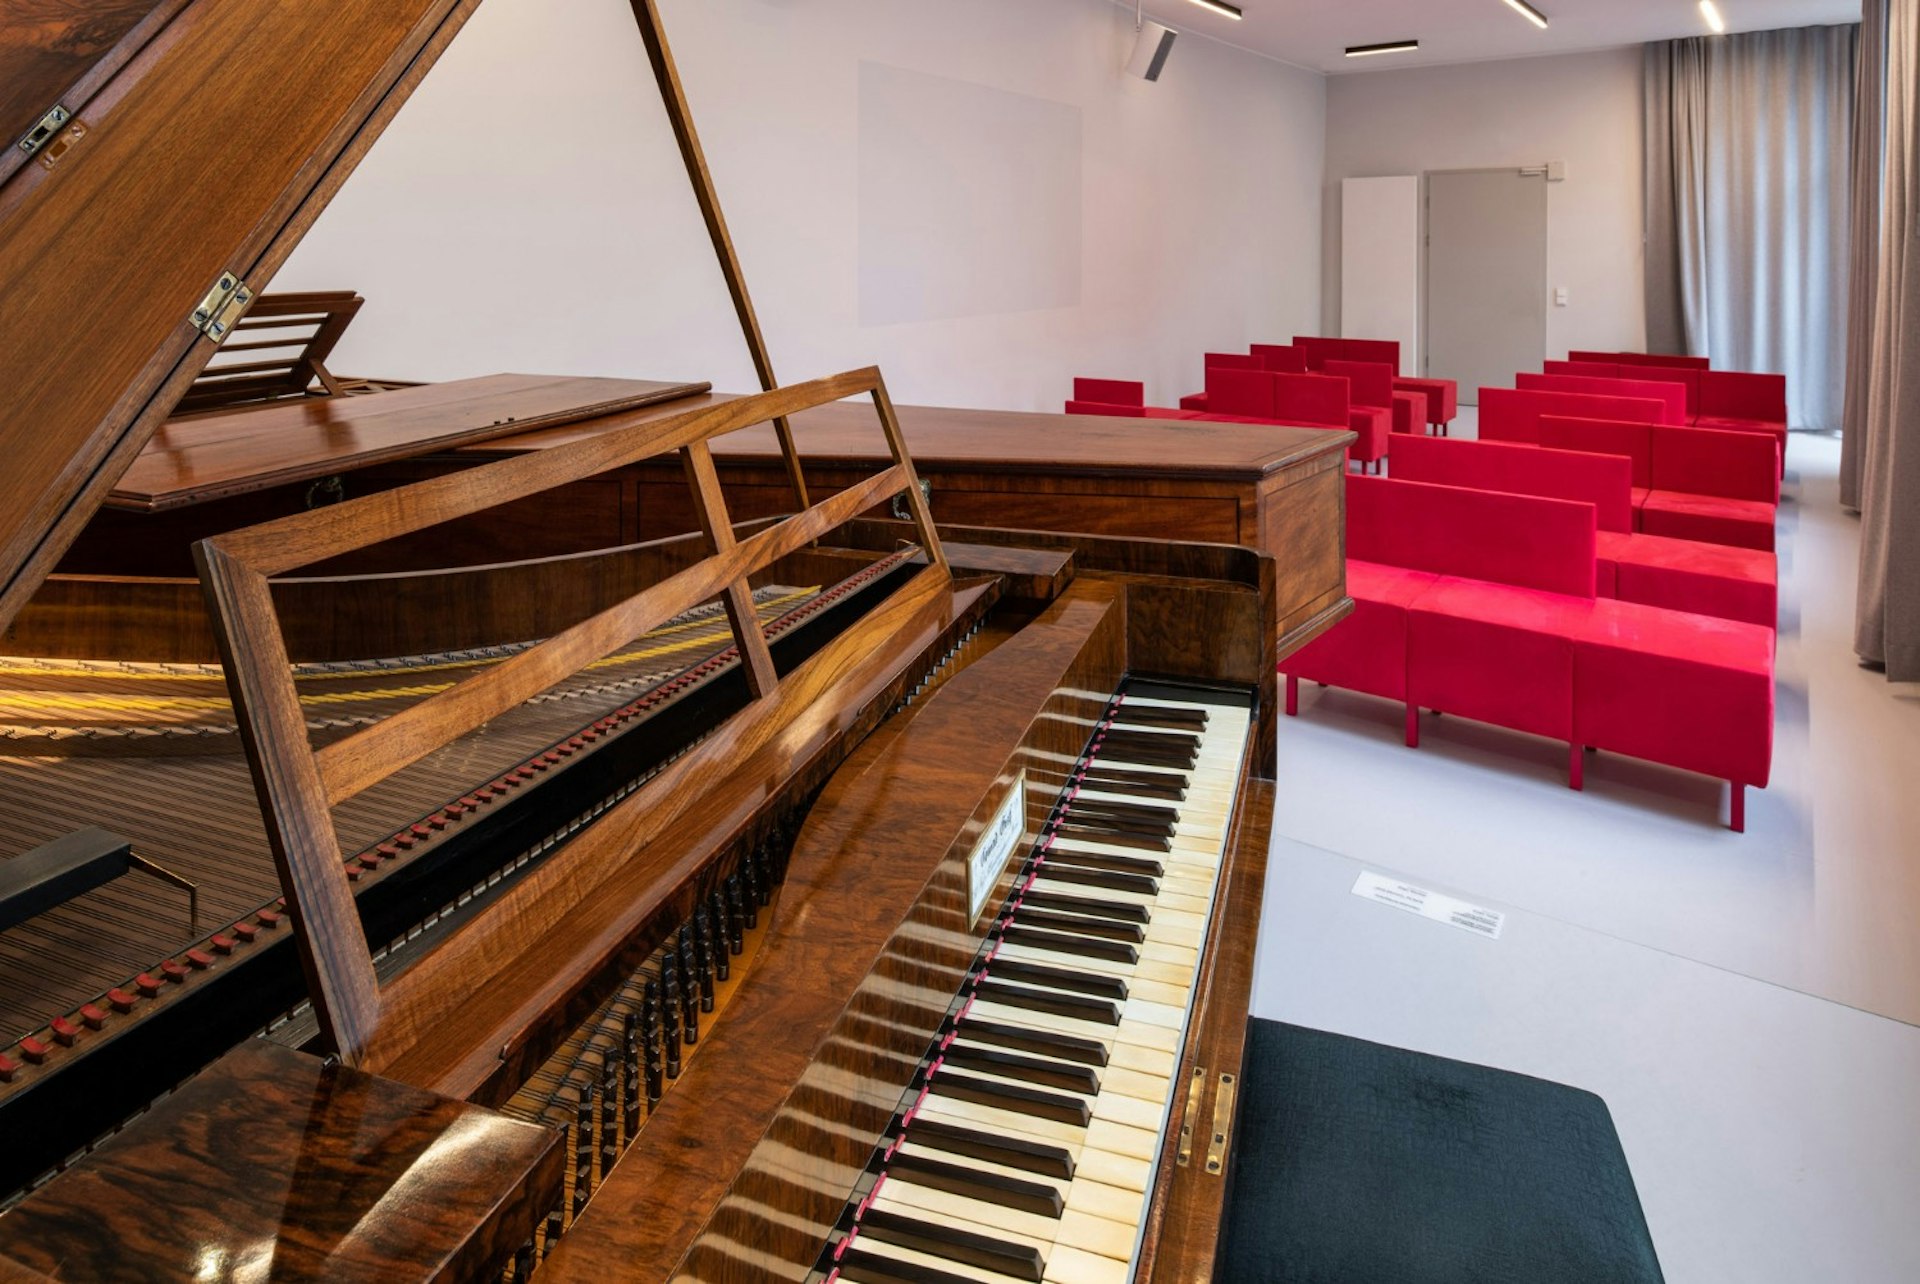 The piano at the new permanent exhibition at Beethoven-Haus museum